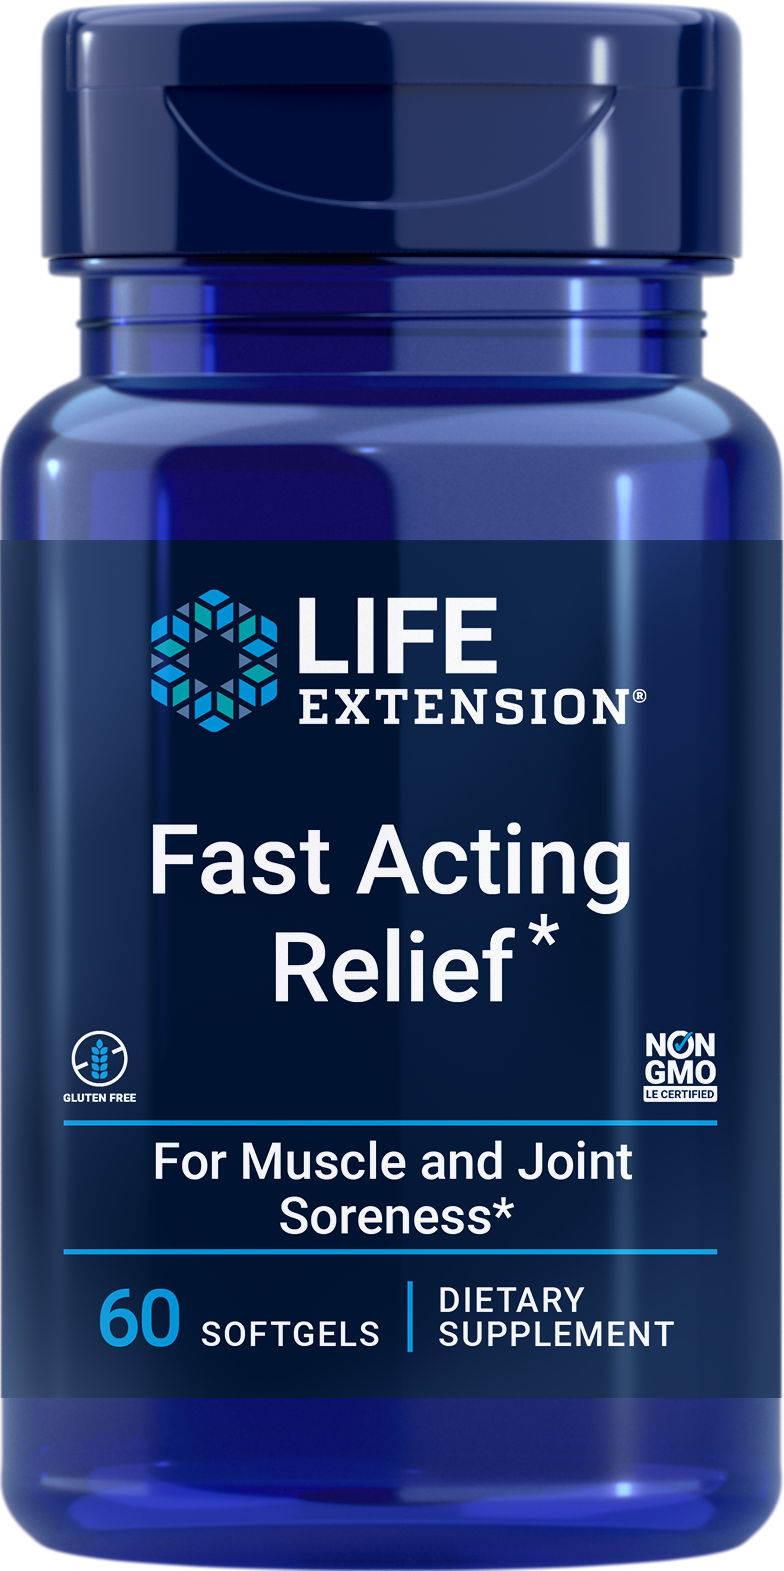 Life Extension Fast Acting Relief, 60 softgels with turmeric, Boswellia & black sesame for bone, muscle & joint comfort.